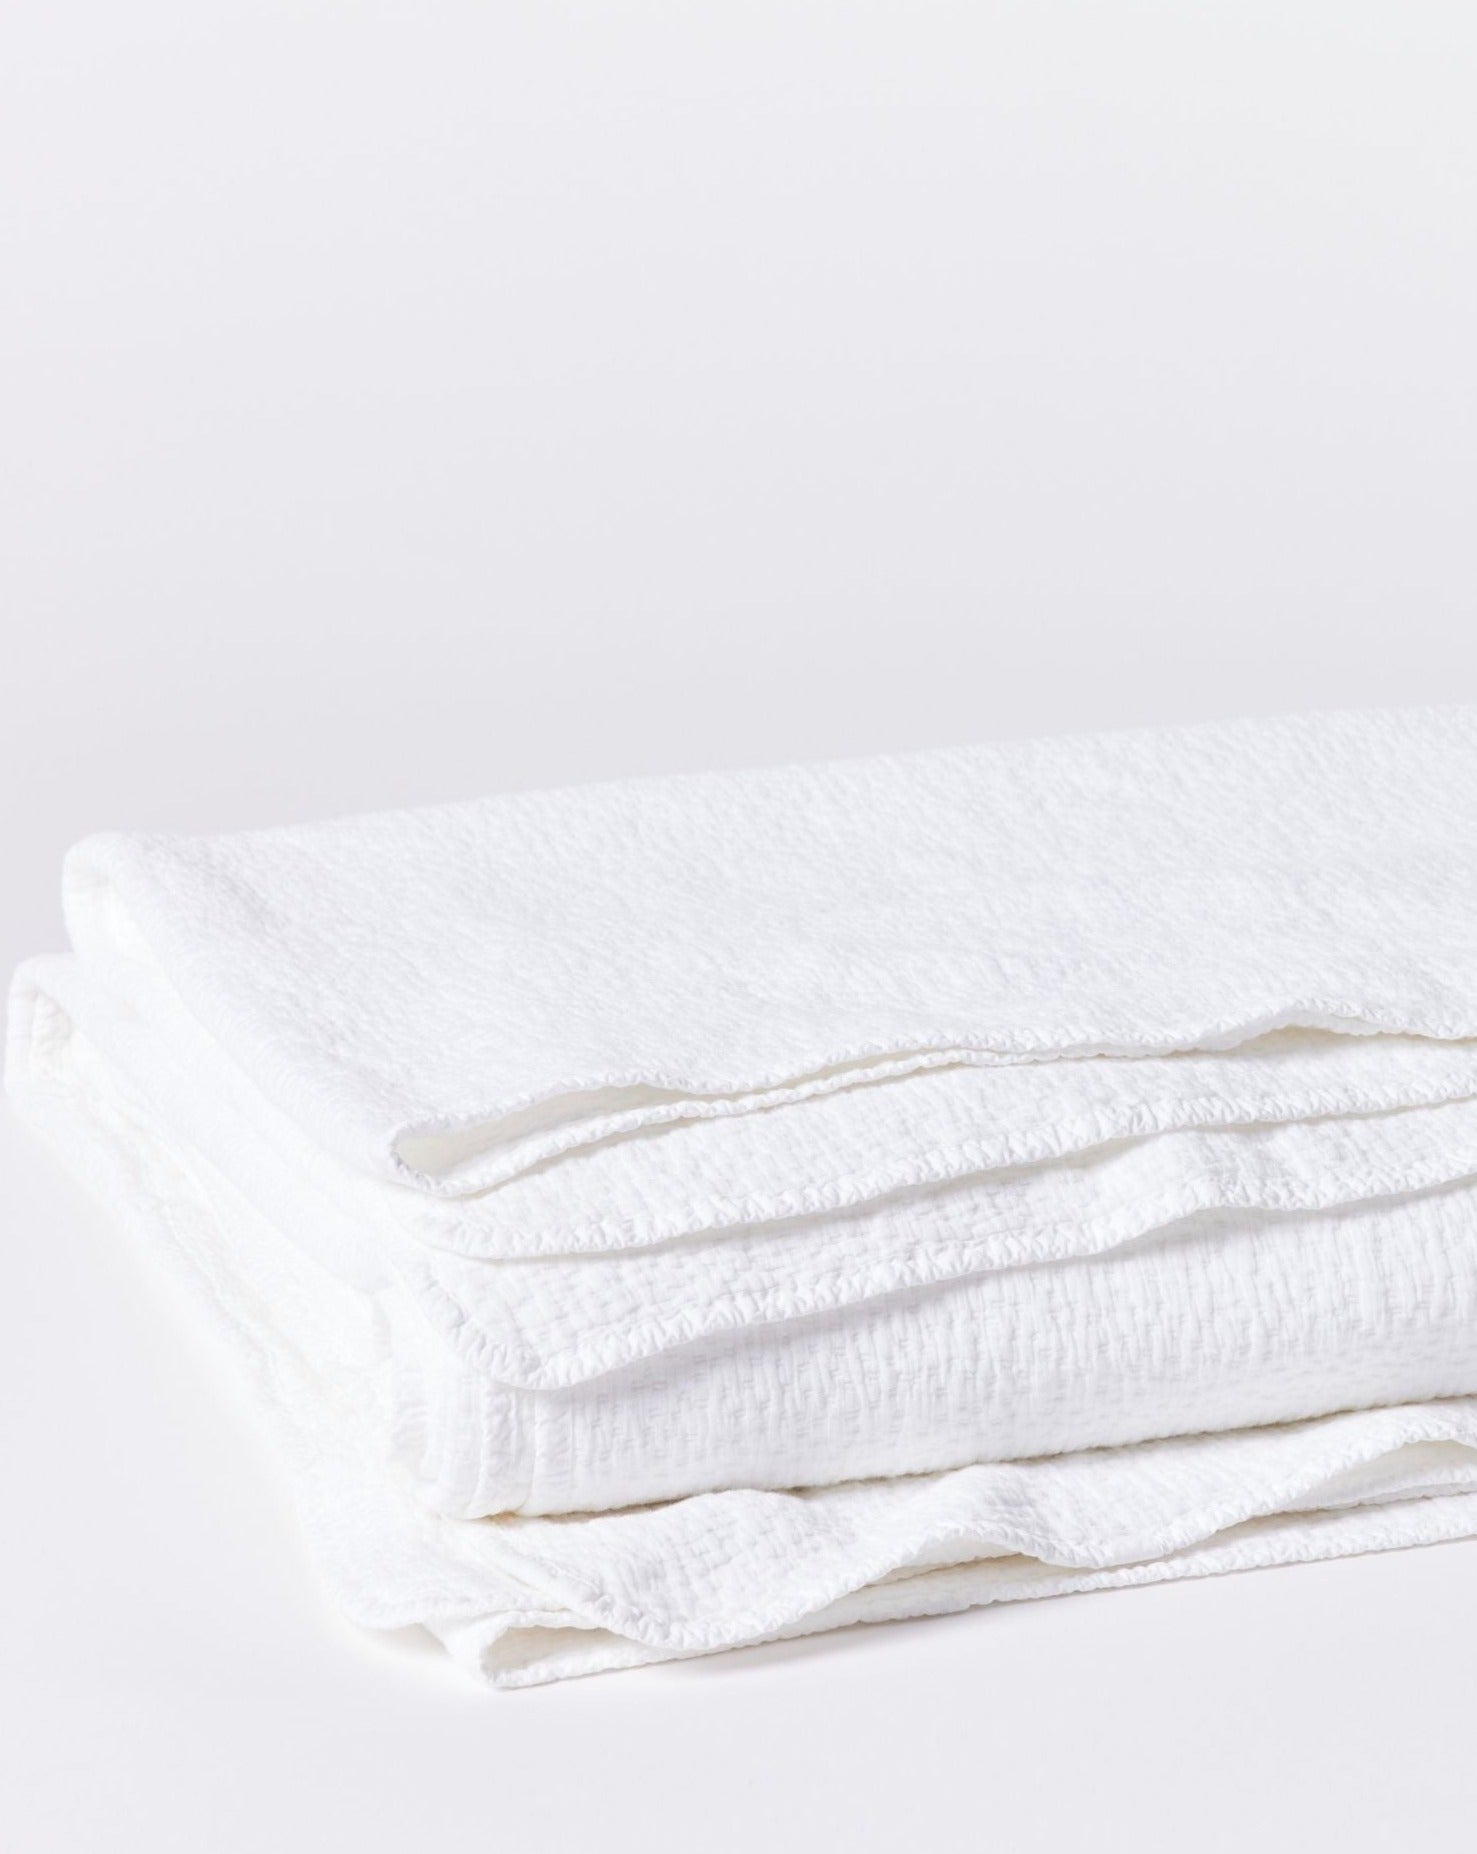 Blanket made with 100% organic cotton is sourced from India and woven in Portugal